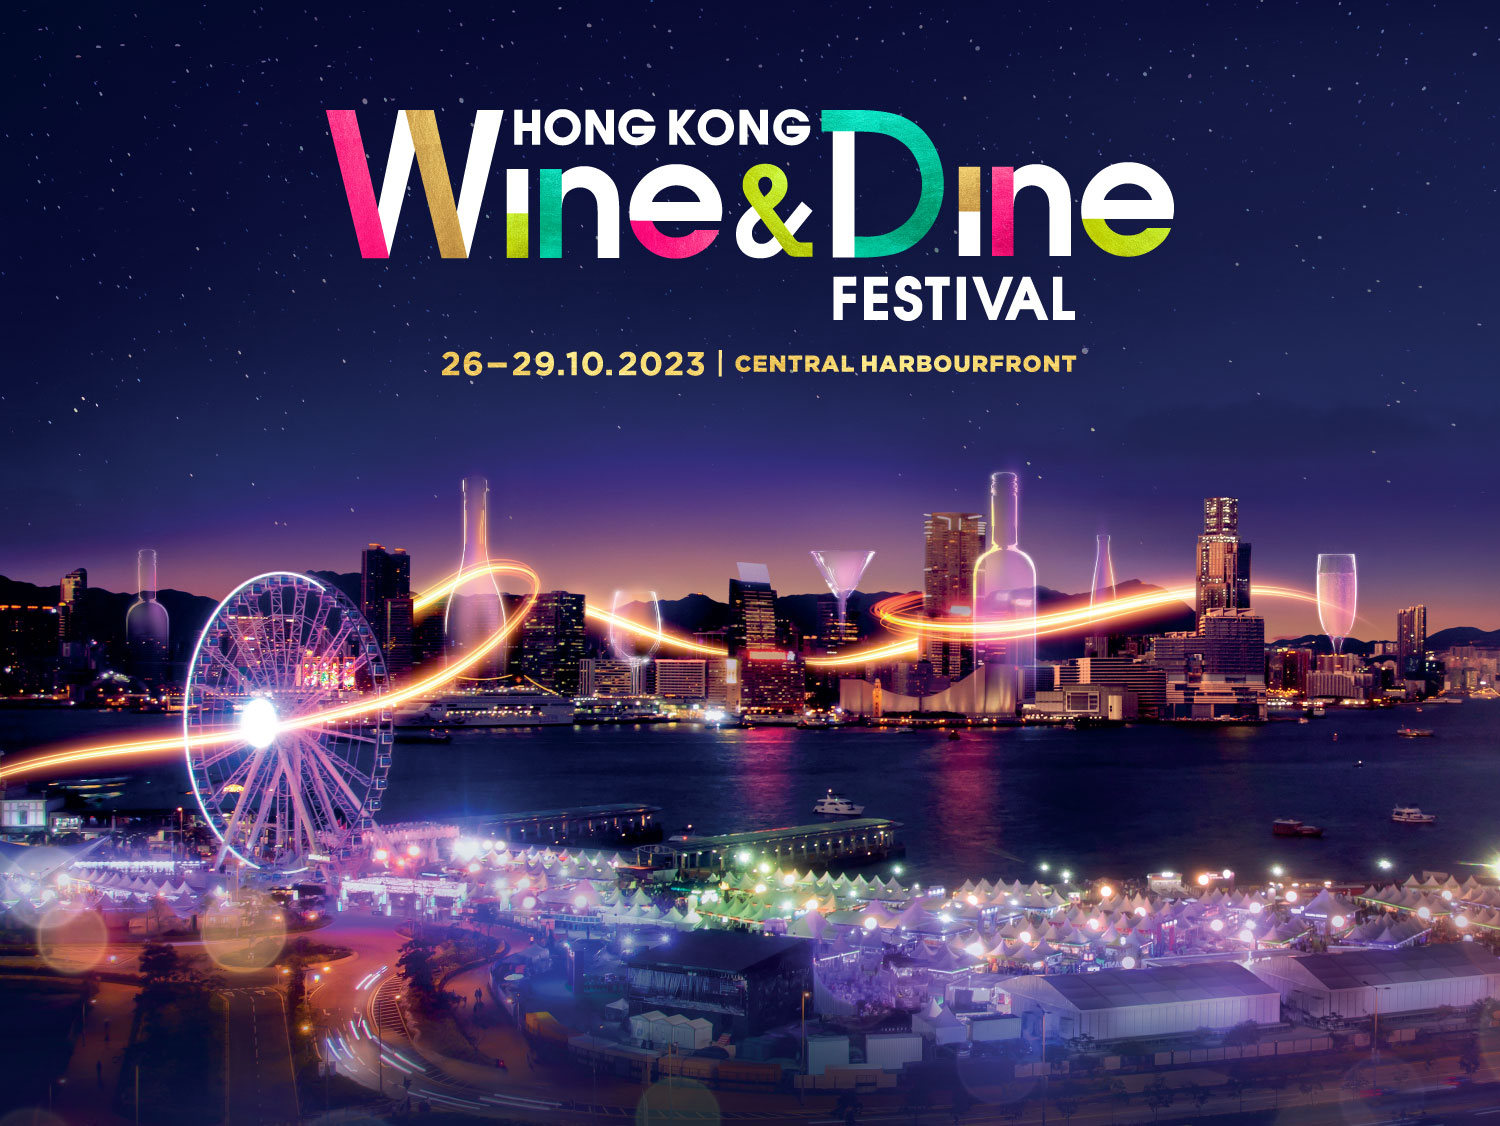 Hong Kong Invites Global Travellers to Discover the City’s Diverse Gastronomy and Nightlife Offerings with a Month-Long Gourmet Extravaganza: Hong Kong Invites Global Travellers to Discover the City’s Diverse Gastronomy and Nightlife Offerings with a Month-Long Gourmet Extravaganza